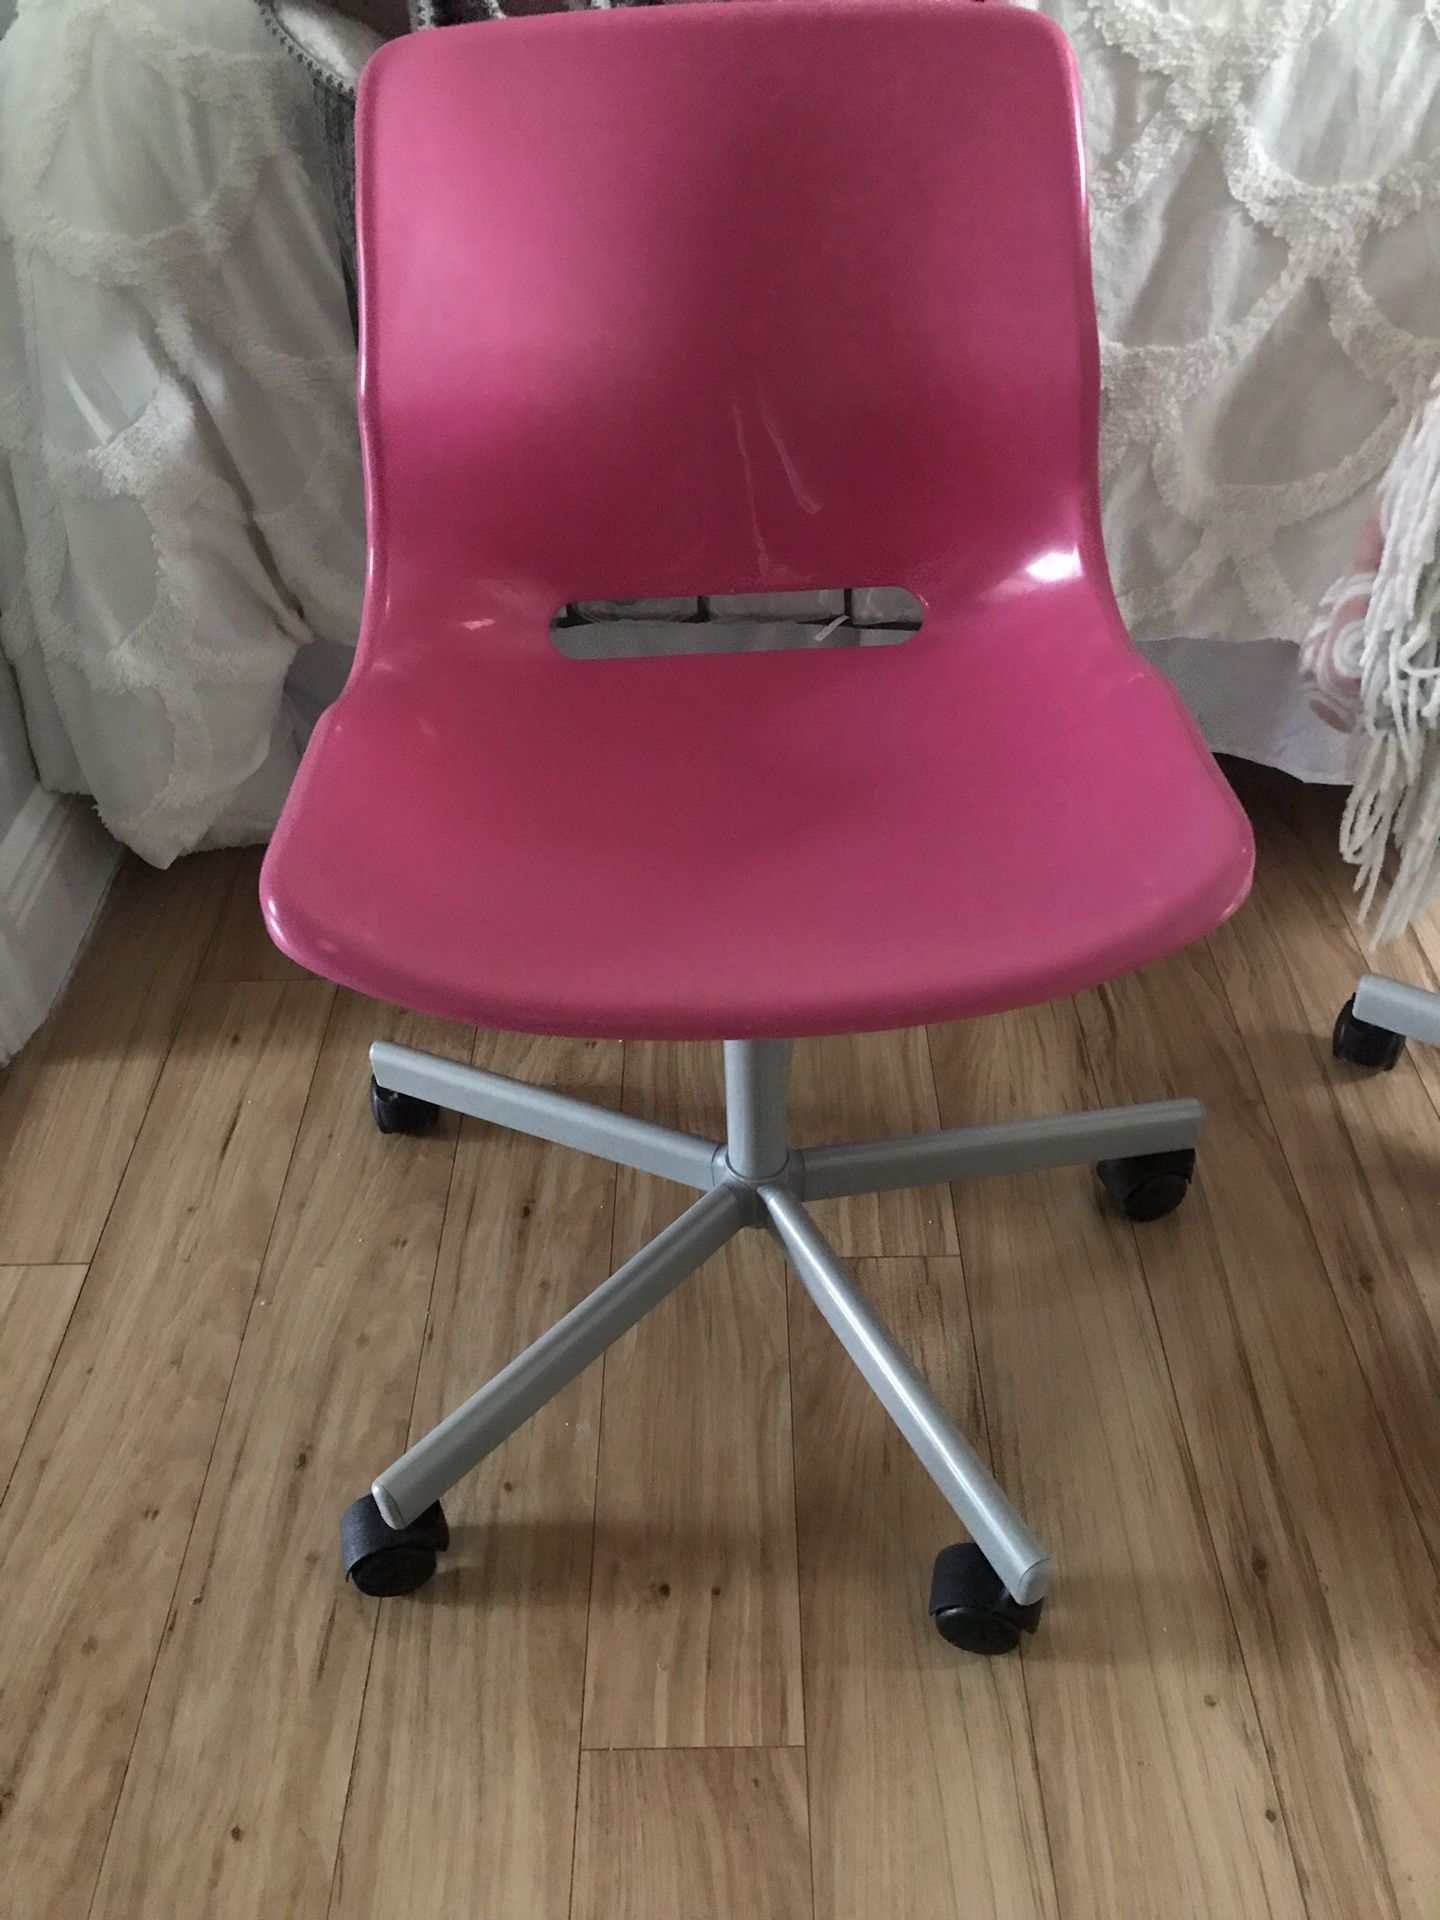 Ikea pink desk chairs (set of 2)